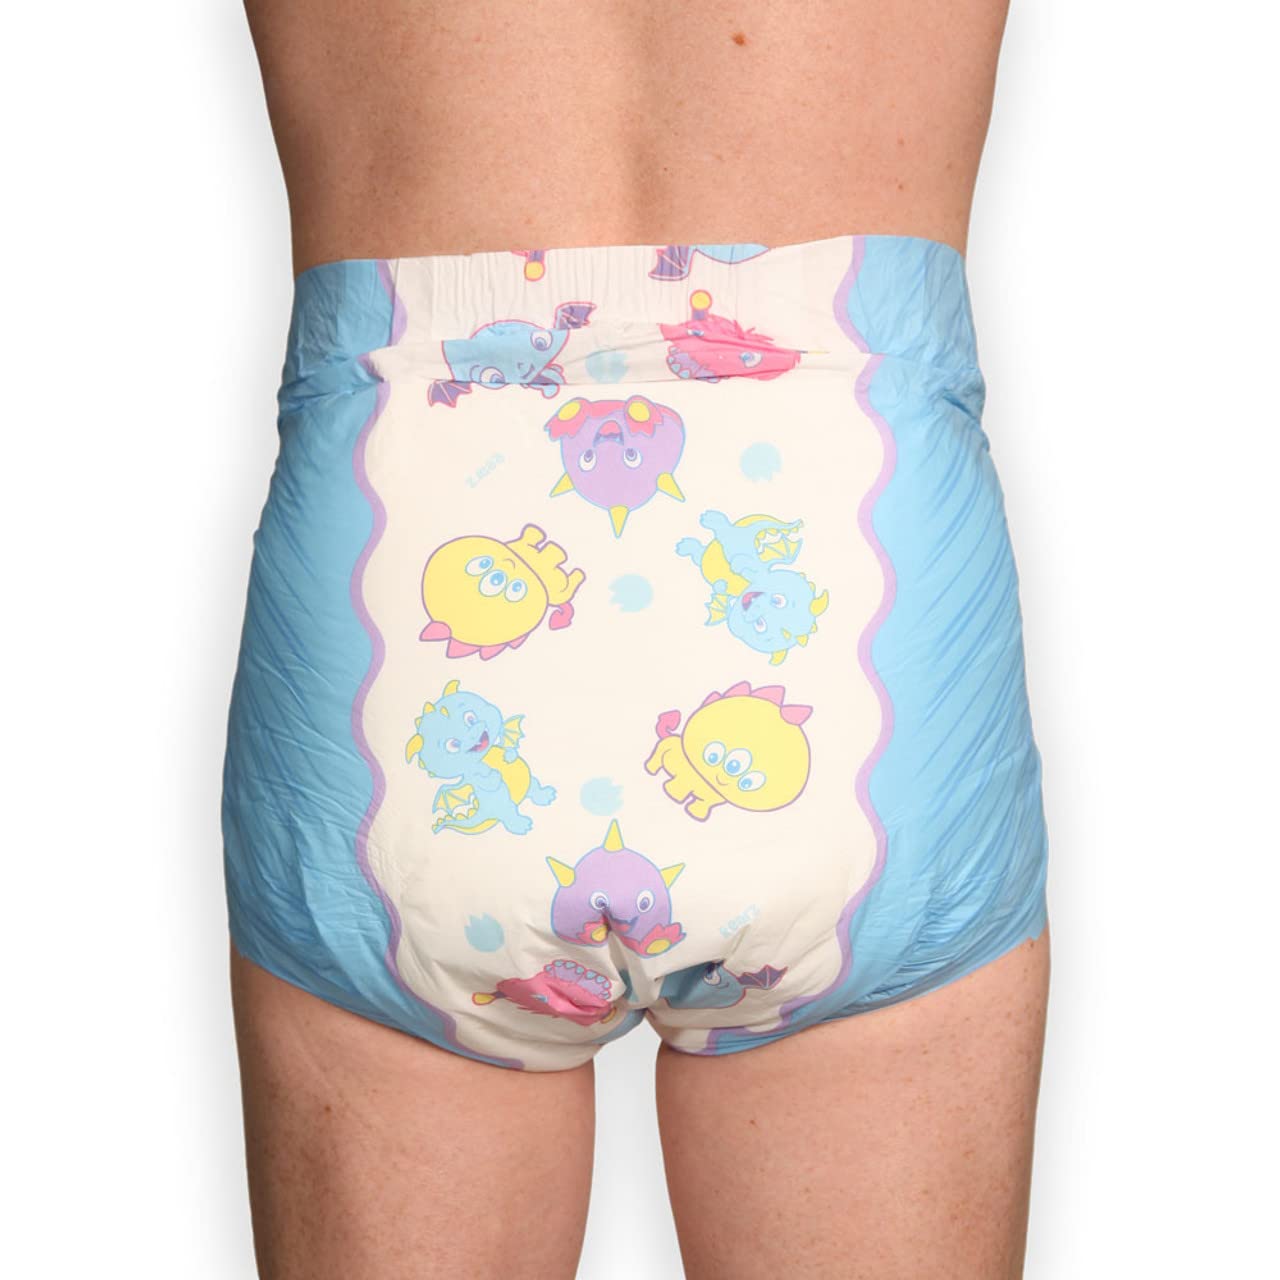 Rearz - Lil' Monsters - V3.0 - Adult Diapers (16 Pack) (Medium)